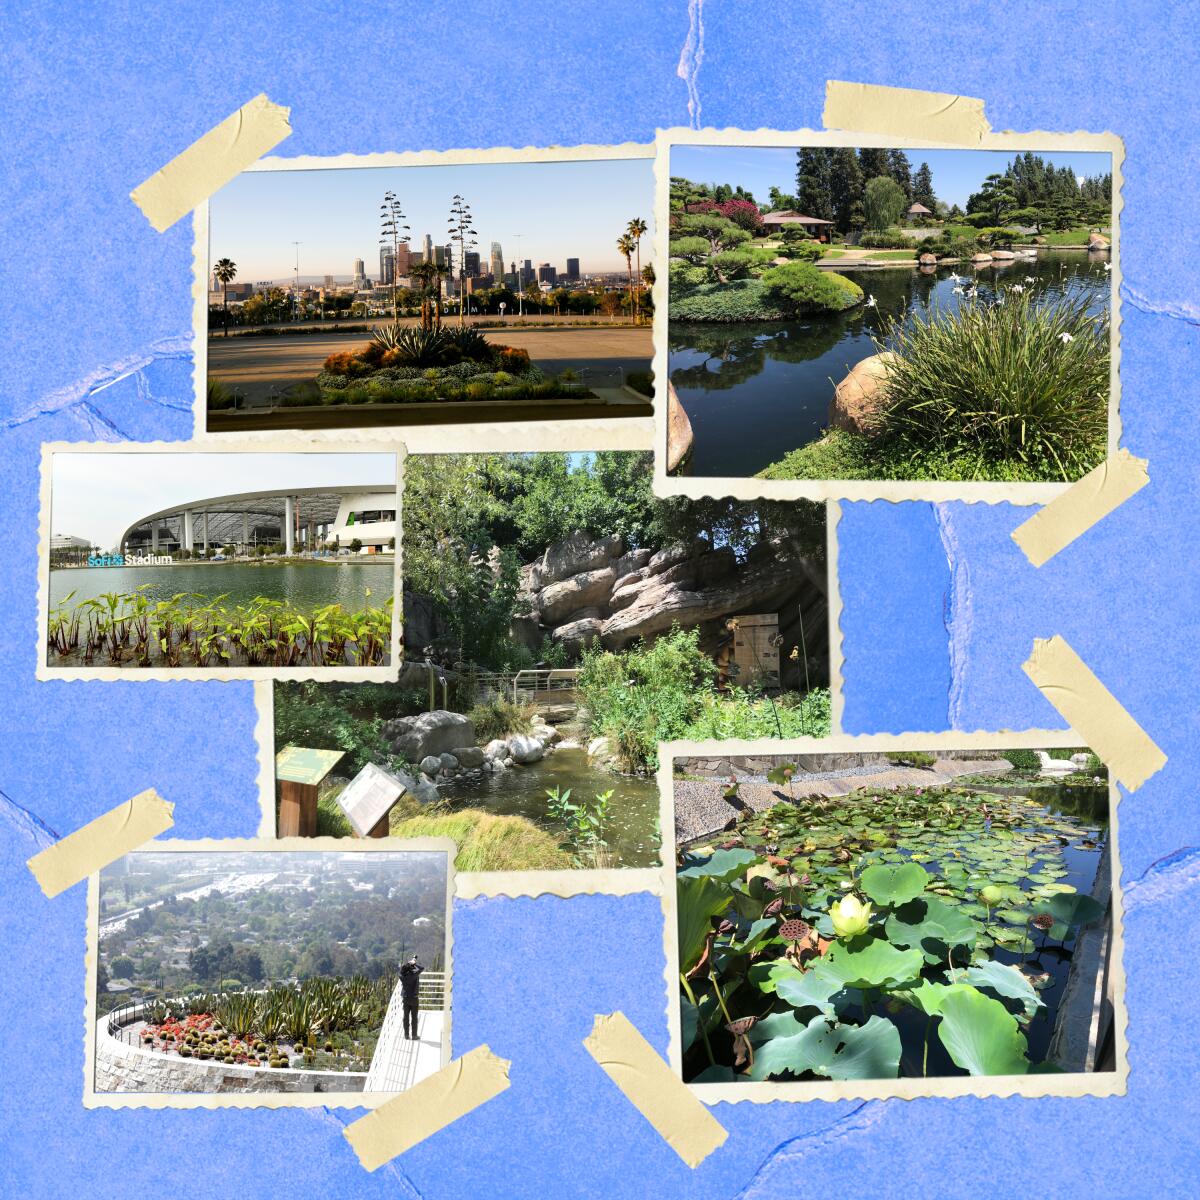 A collage of photos showing places with greenery.